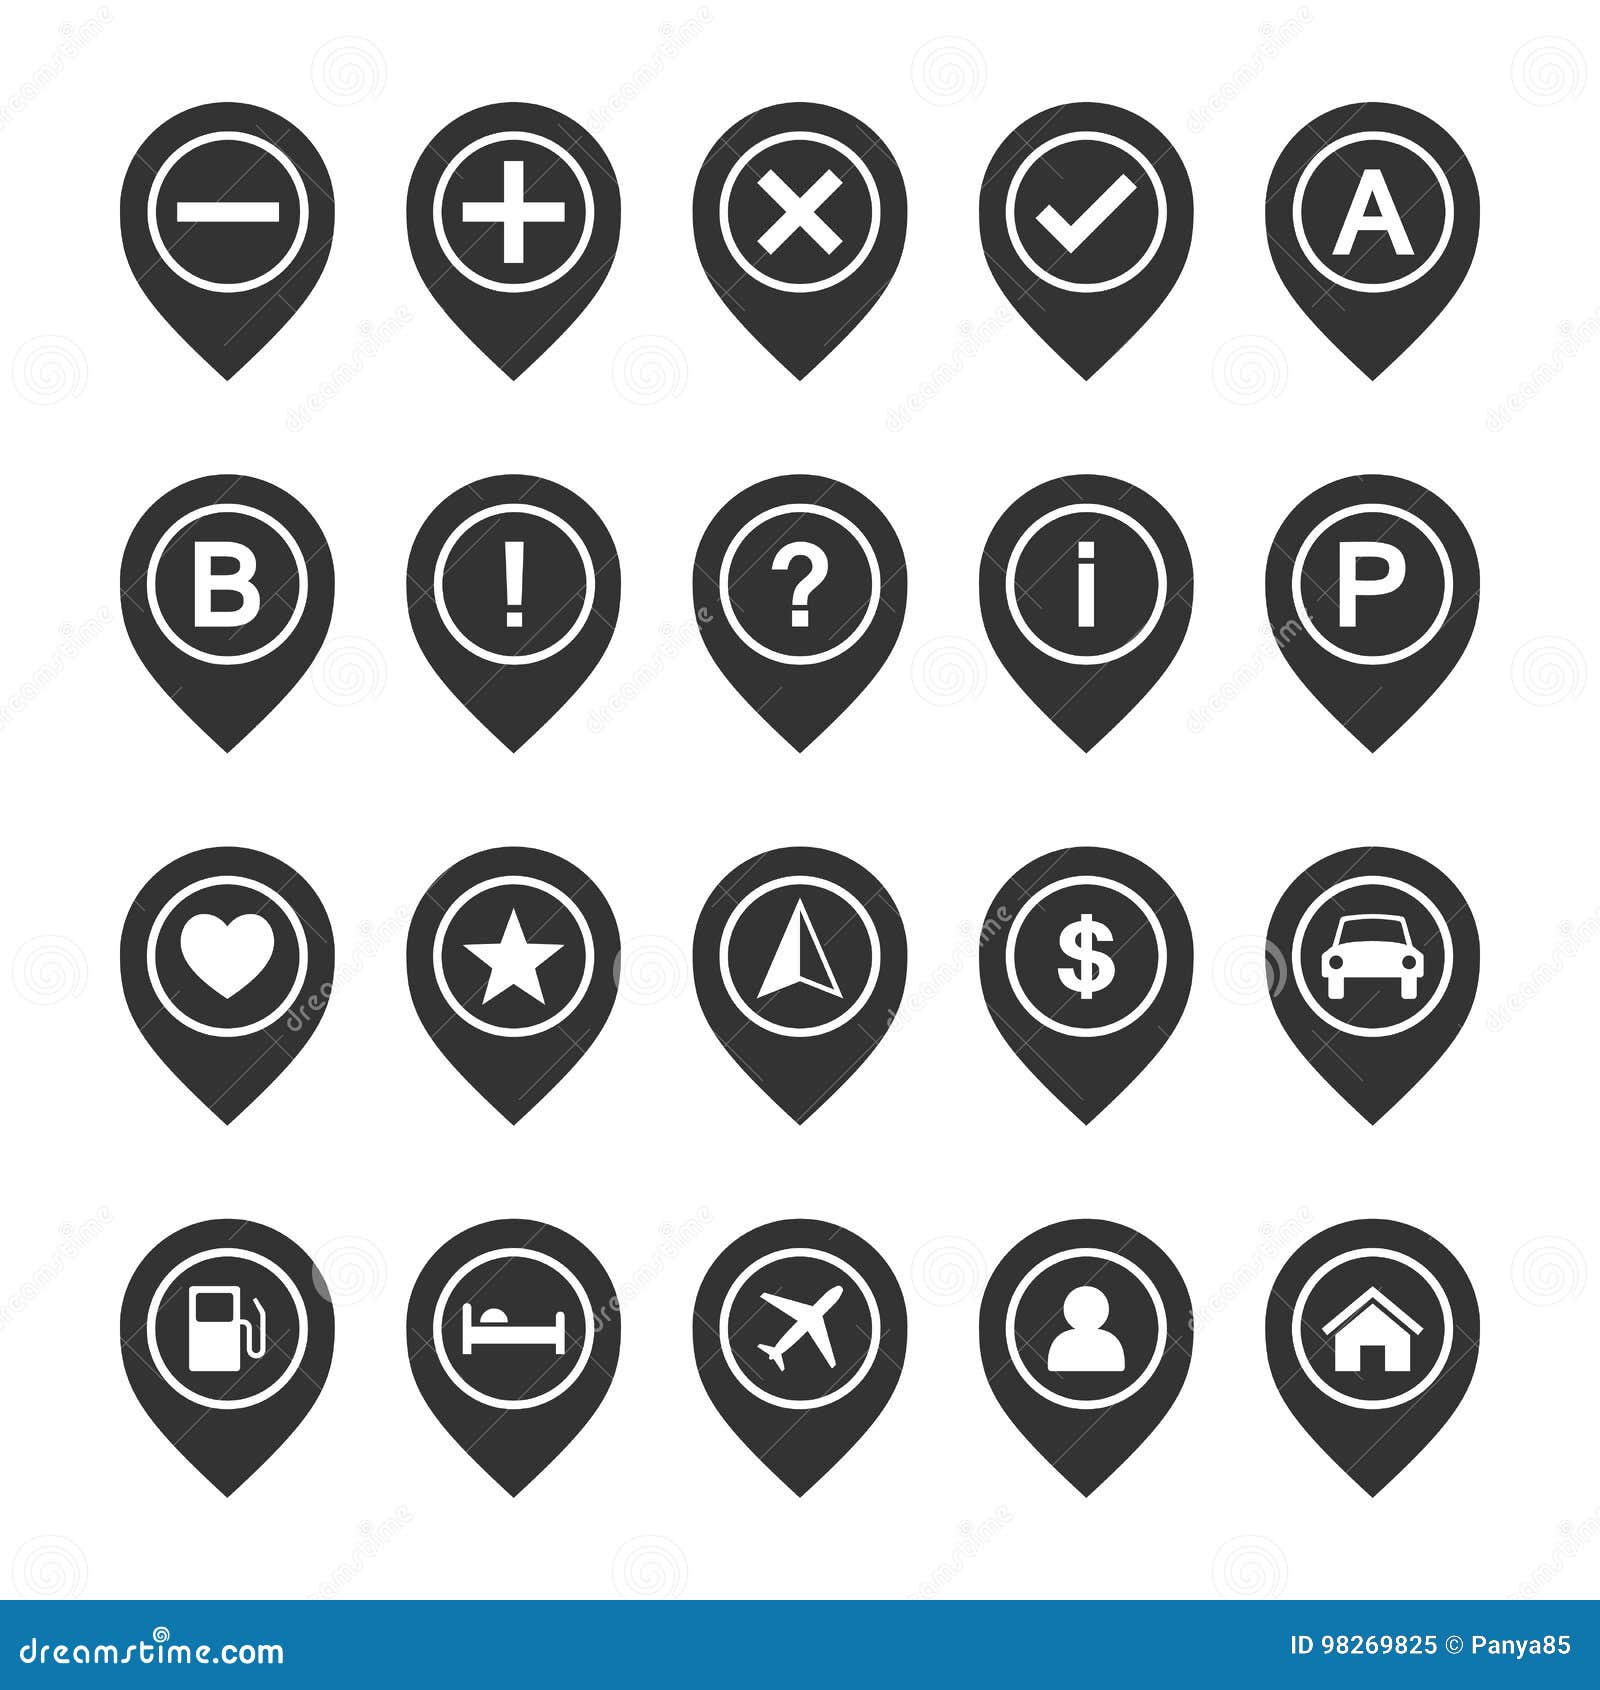  icon set of map pins or pointers. place location markers or signs